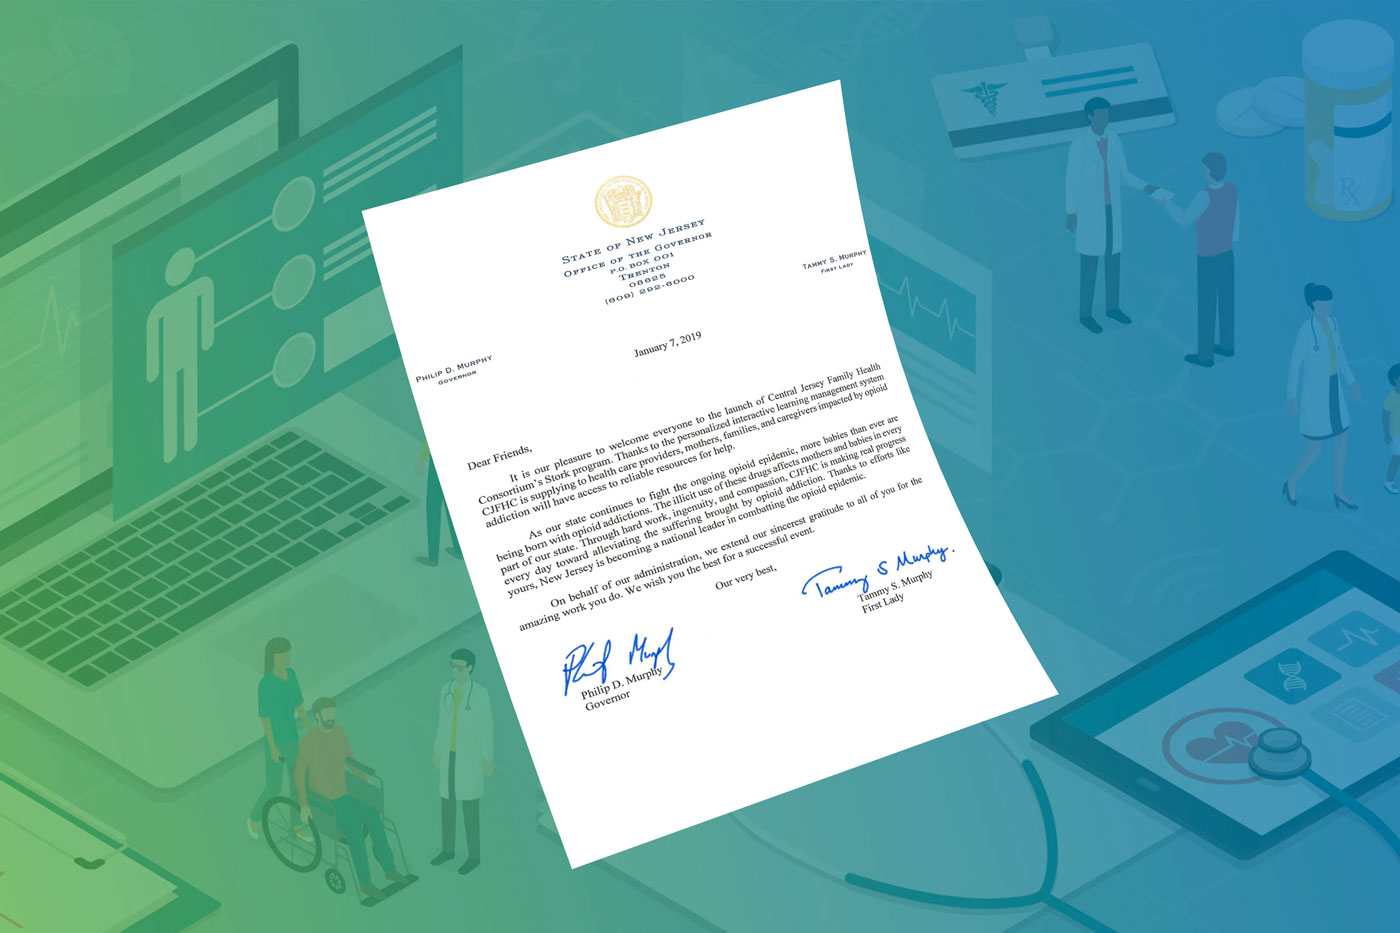 CJFHC Letter from the Governor on GoMo Health Background